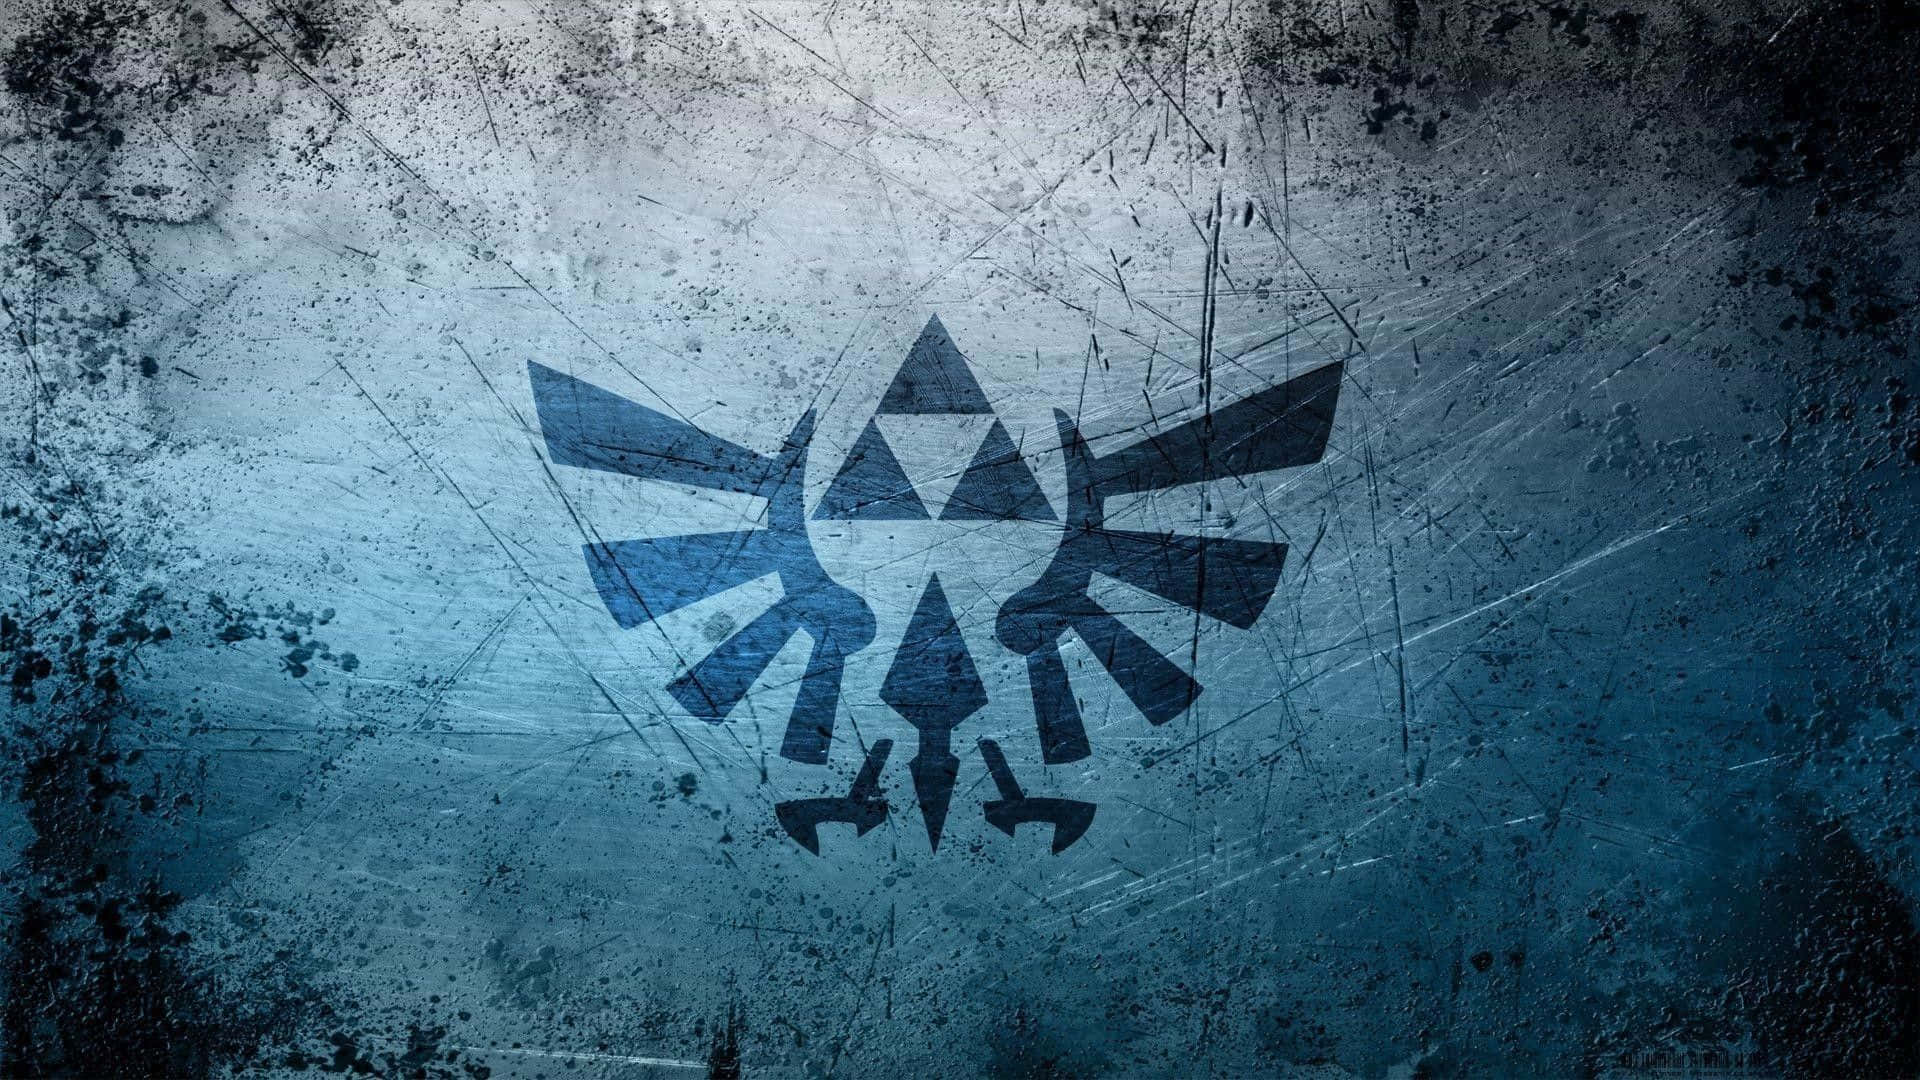 Three Sacred Triangles Of Power And Wisdom, Forming The Iconic Triforce.